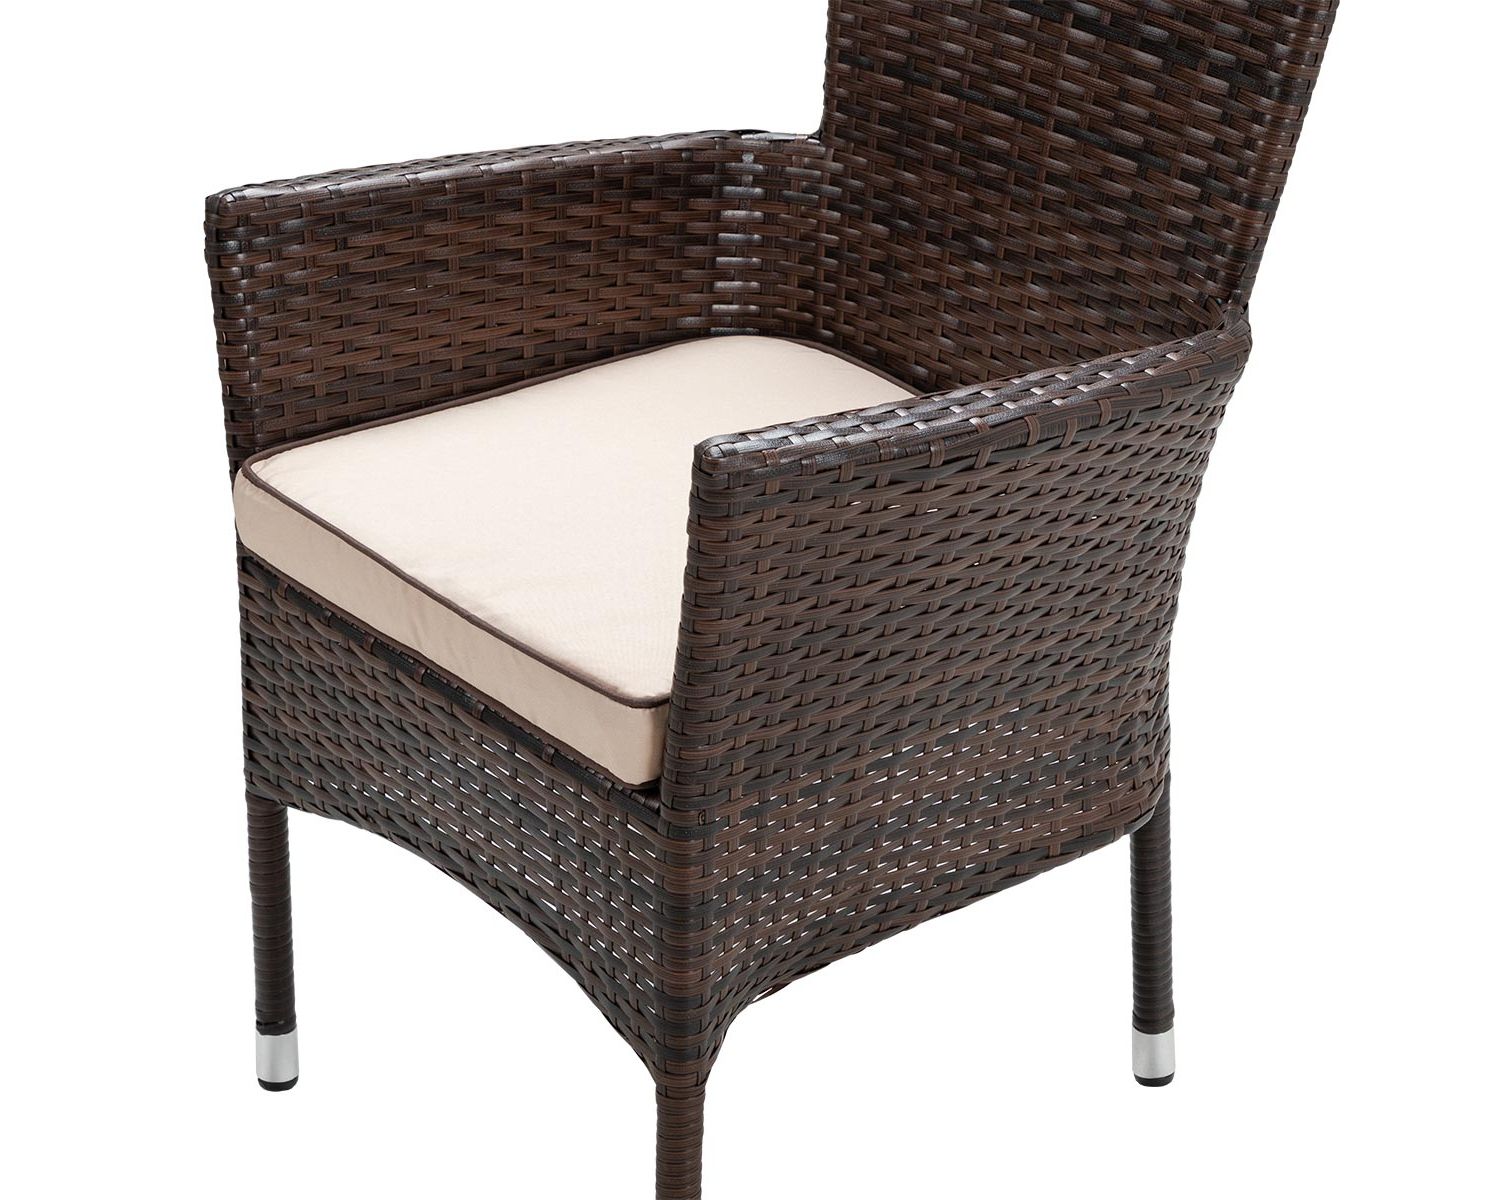 Best And Newest Distressed Wicker Patio Dining Set Intended For Cambridge 4 Stackable Chairs And Large Rectangular Dining Table Set In (View 15 of 15)